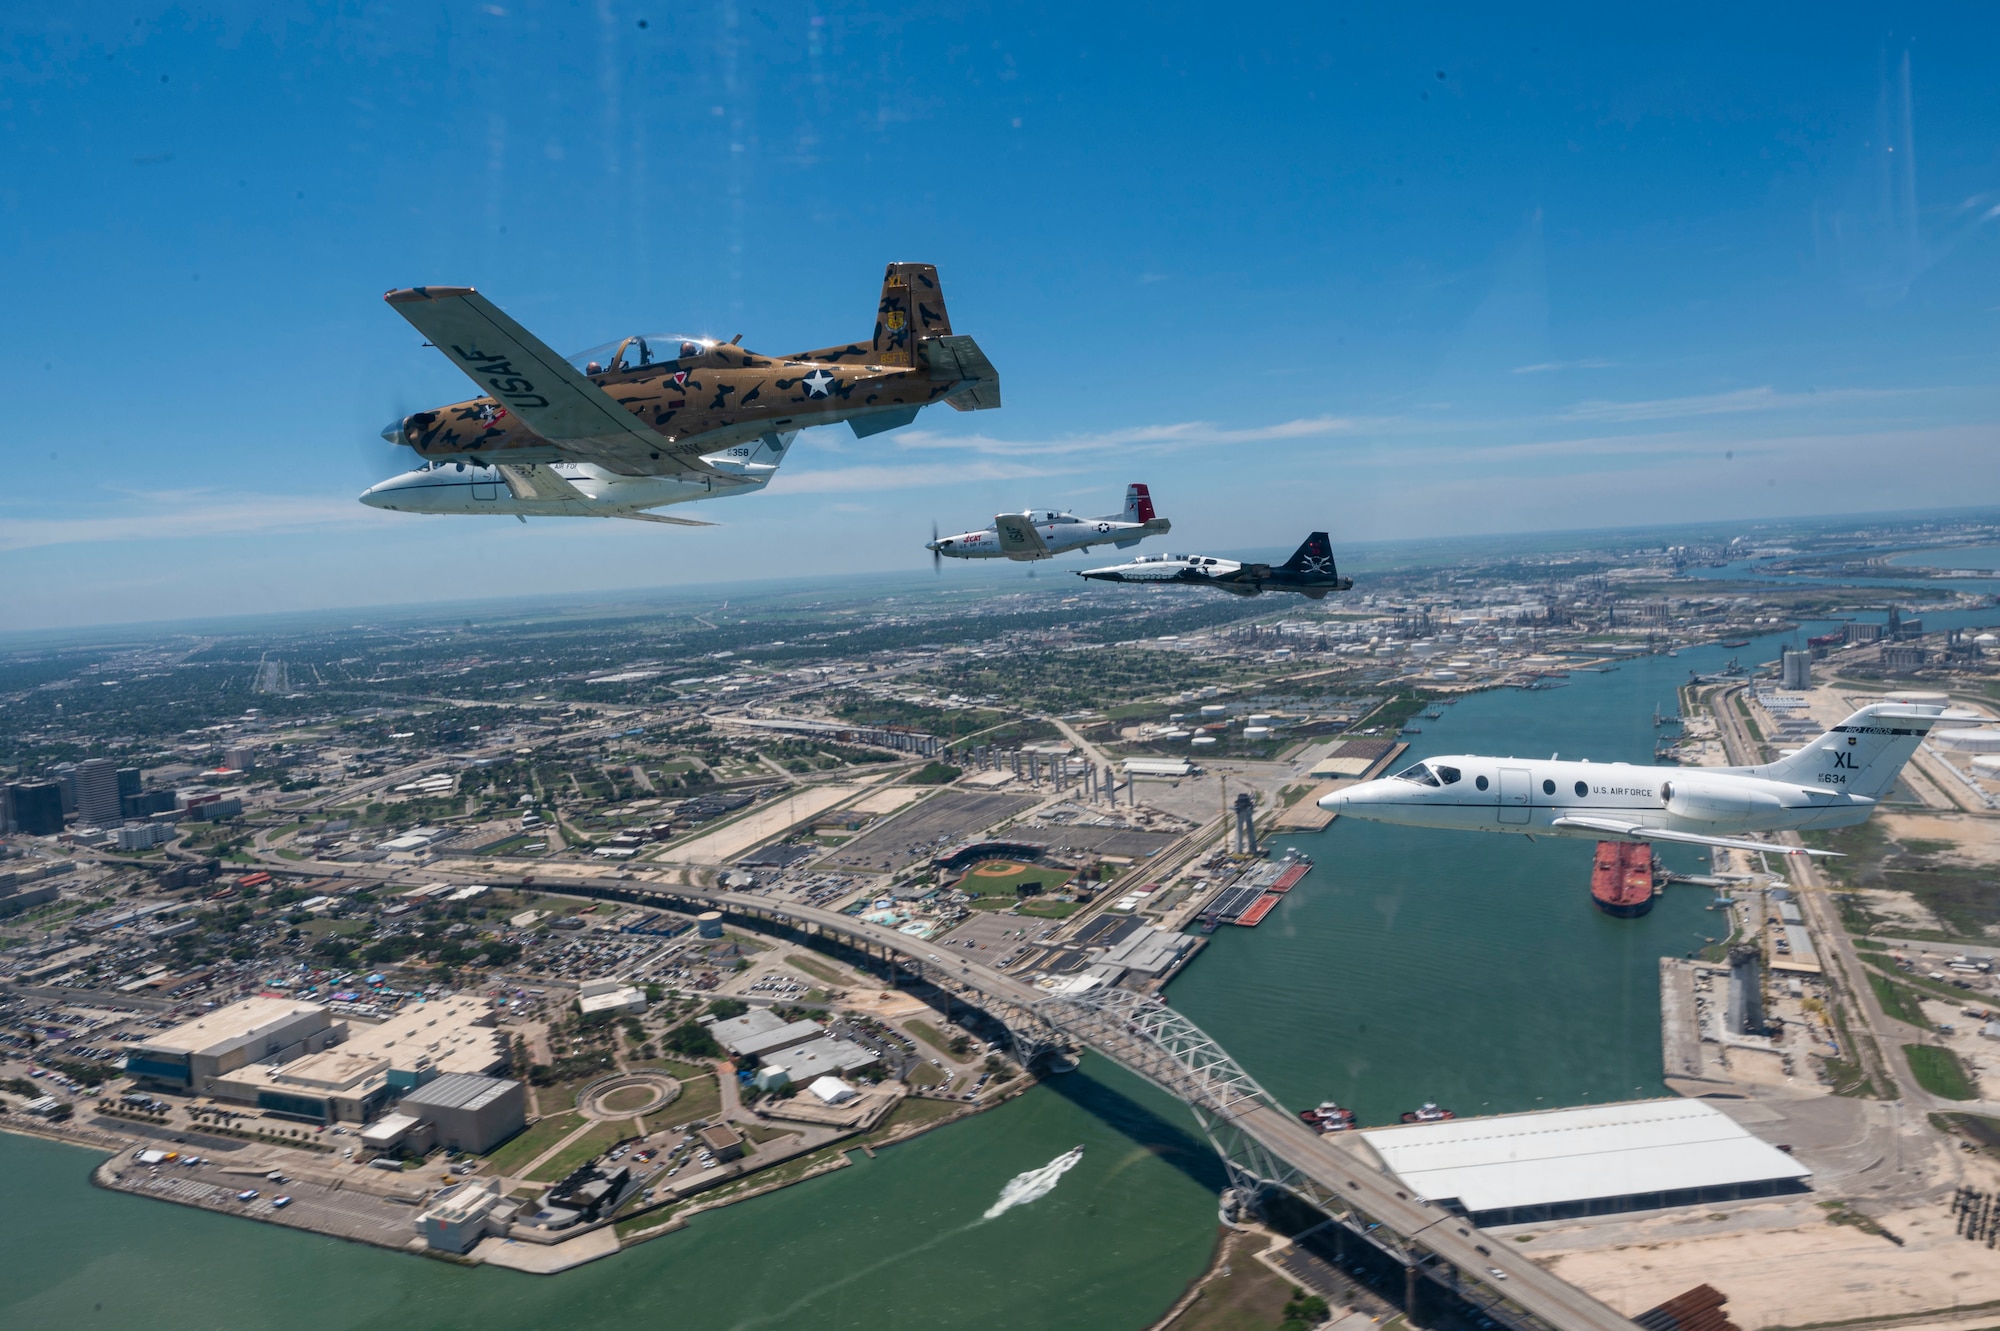 A six-ship dissimilar formation consisting of two T-1A Jayhawks, two T-38 Talons, and two T-6A Texan II aircrafts from Laughlin Air Force Base, Texas, practice advanced maneuvering May, 2, 2021. Instructor pilots from the 434th, 87th and 85th Flying Training Squadrons demonstrated the flying proficiency all Air Force student pilots receive during their 52-week Specialized Undergraduate Pilot Training, before being assigned to their operational career airframe. (U.S. Air Force photo by Airman 1st Class David Phaff)